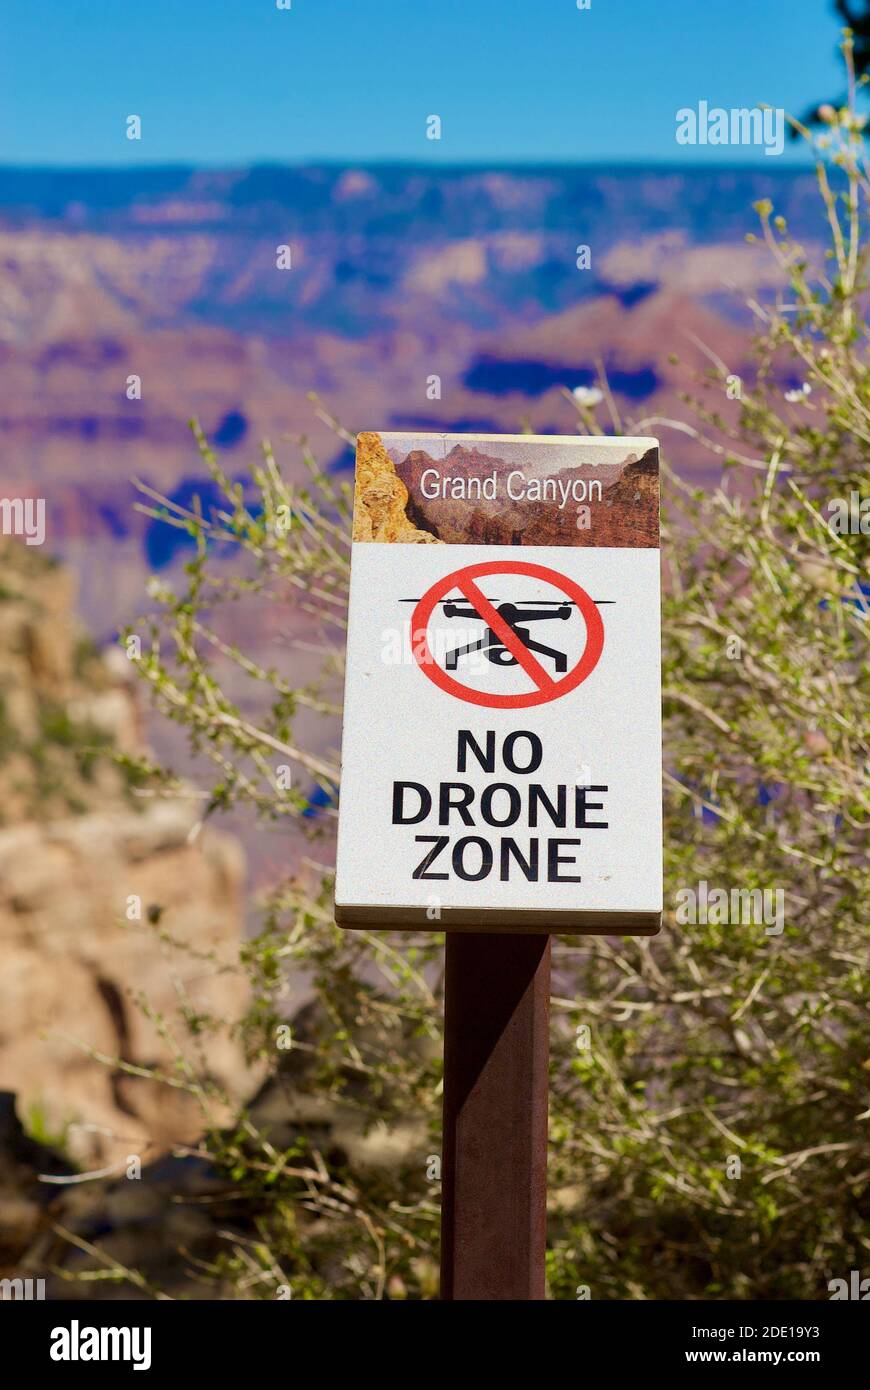 FALSK belastning Barber Grand Canyon National Park, Arizona, USA - July 29, 2020: A "No Drone Zone"  sign reminds visitors it is illegal to fly drones over the Grand Canyon  Stock Photo - Alamy